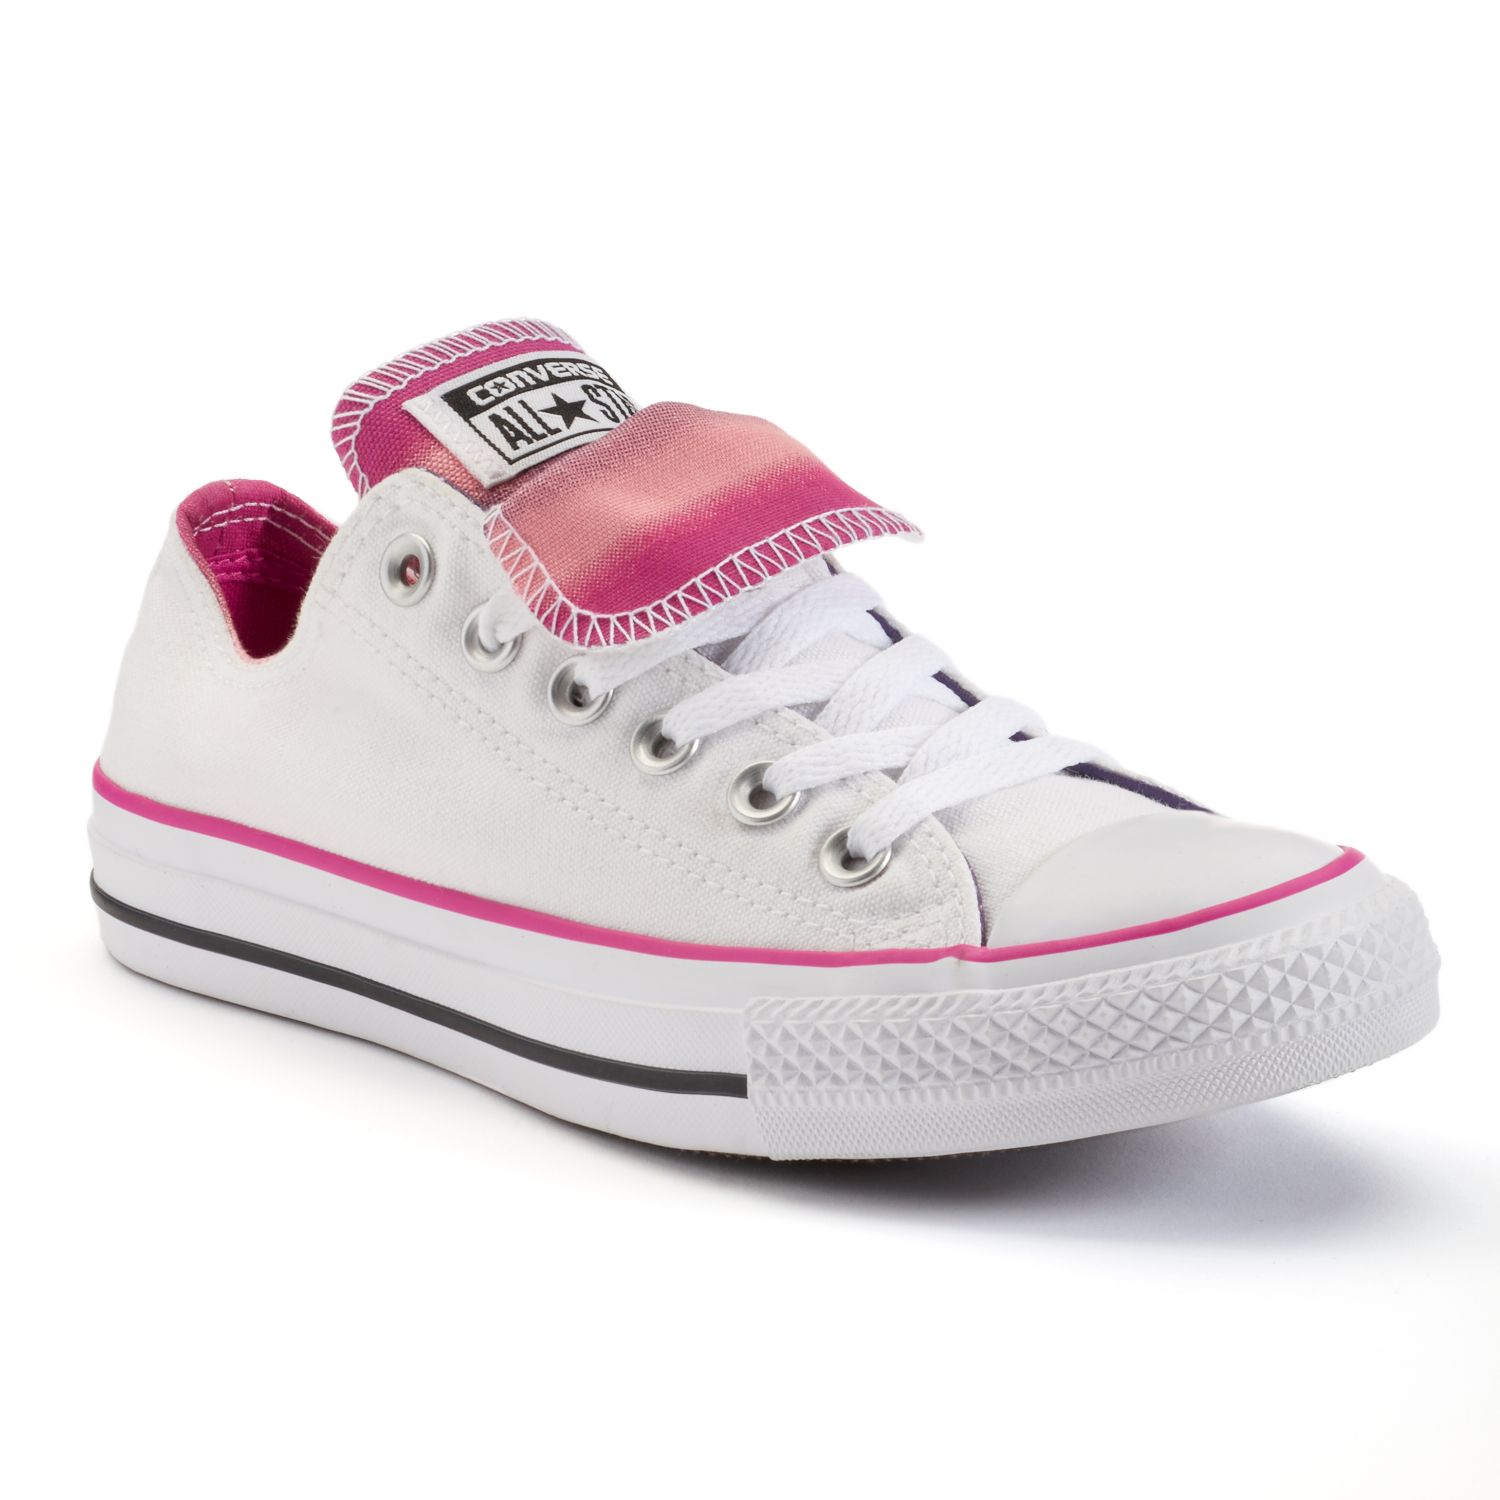 women's chuck taylor all star double tongue low top sneaker